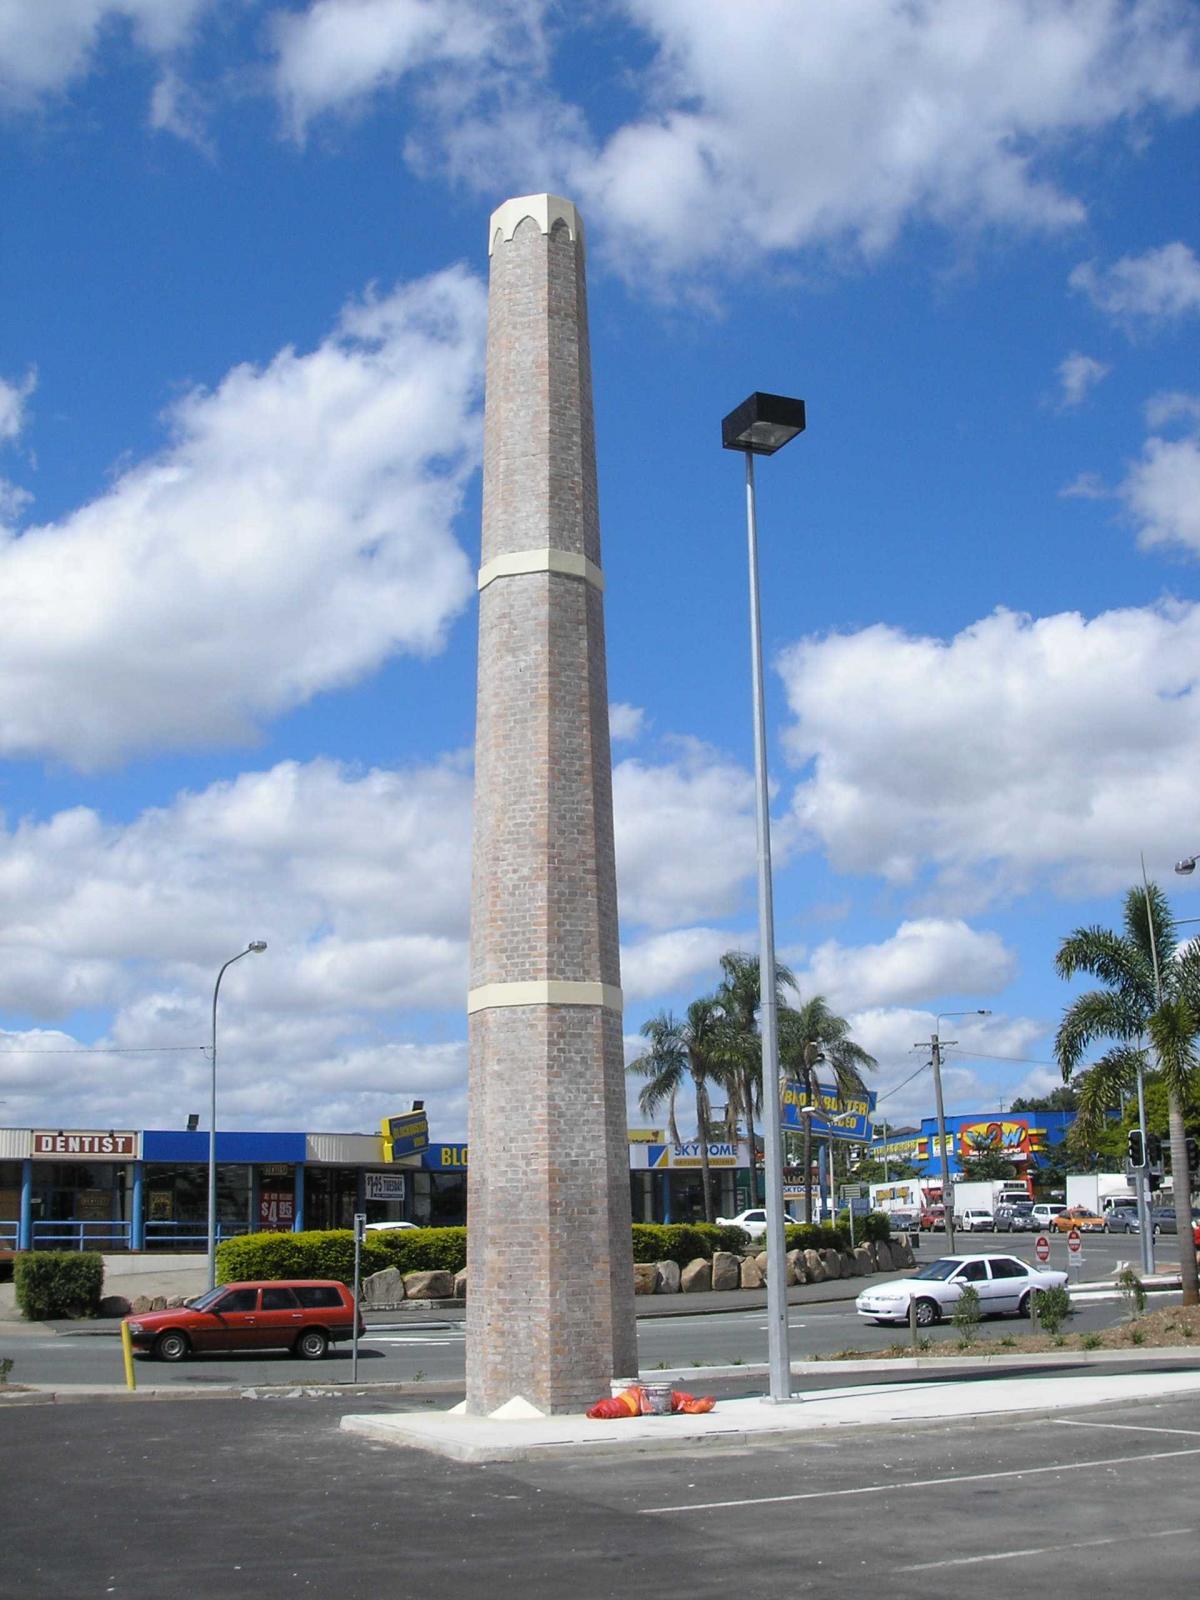 This is an image of the local heritage place known as Buranda Ventilation Shaft